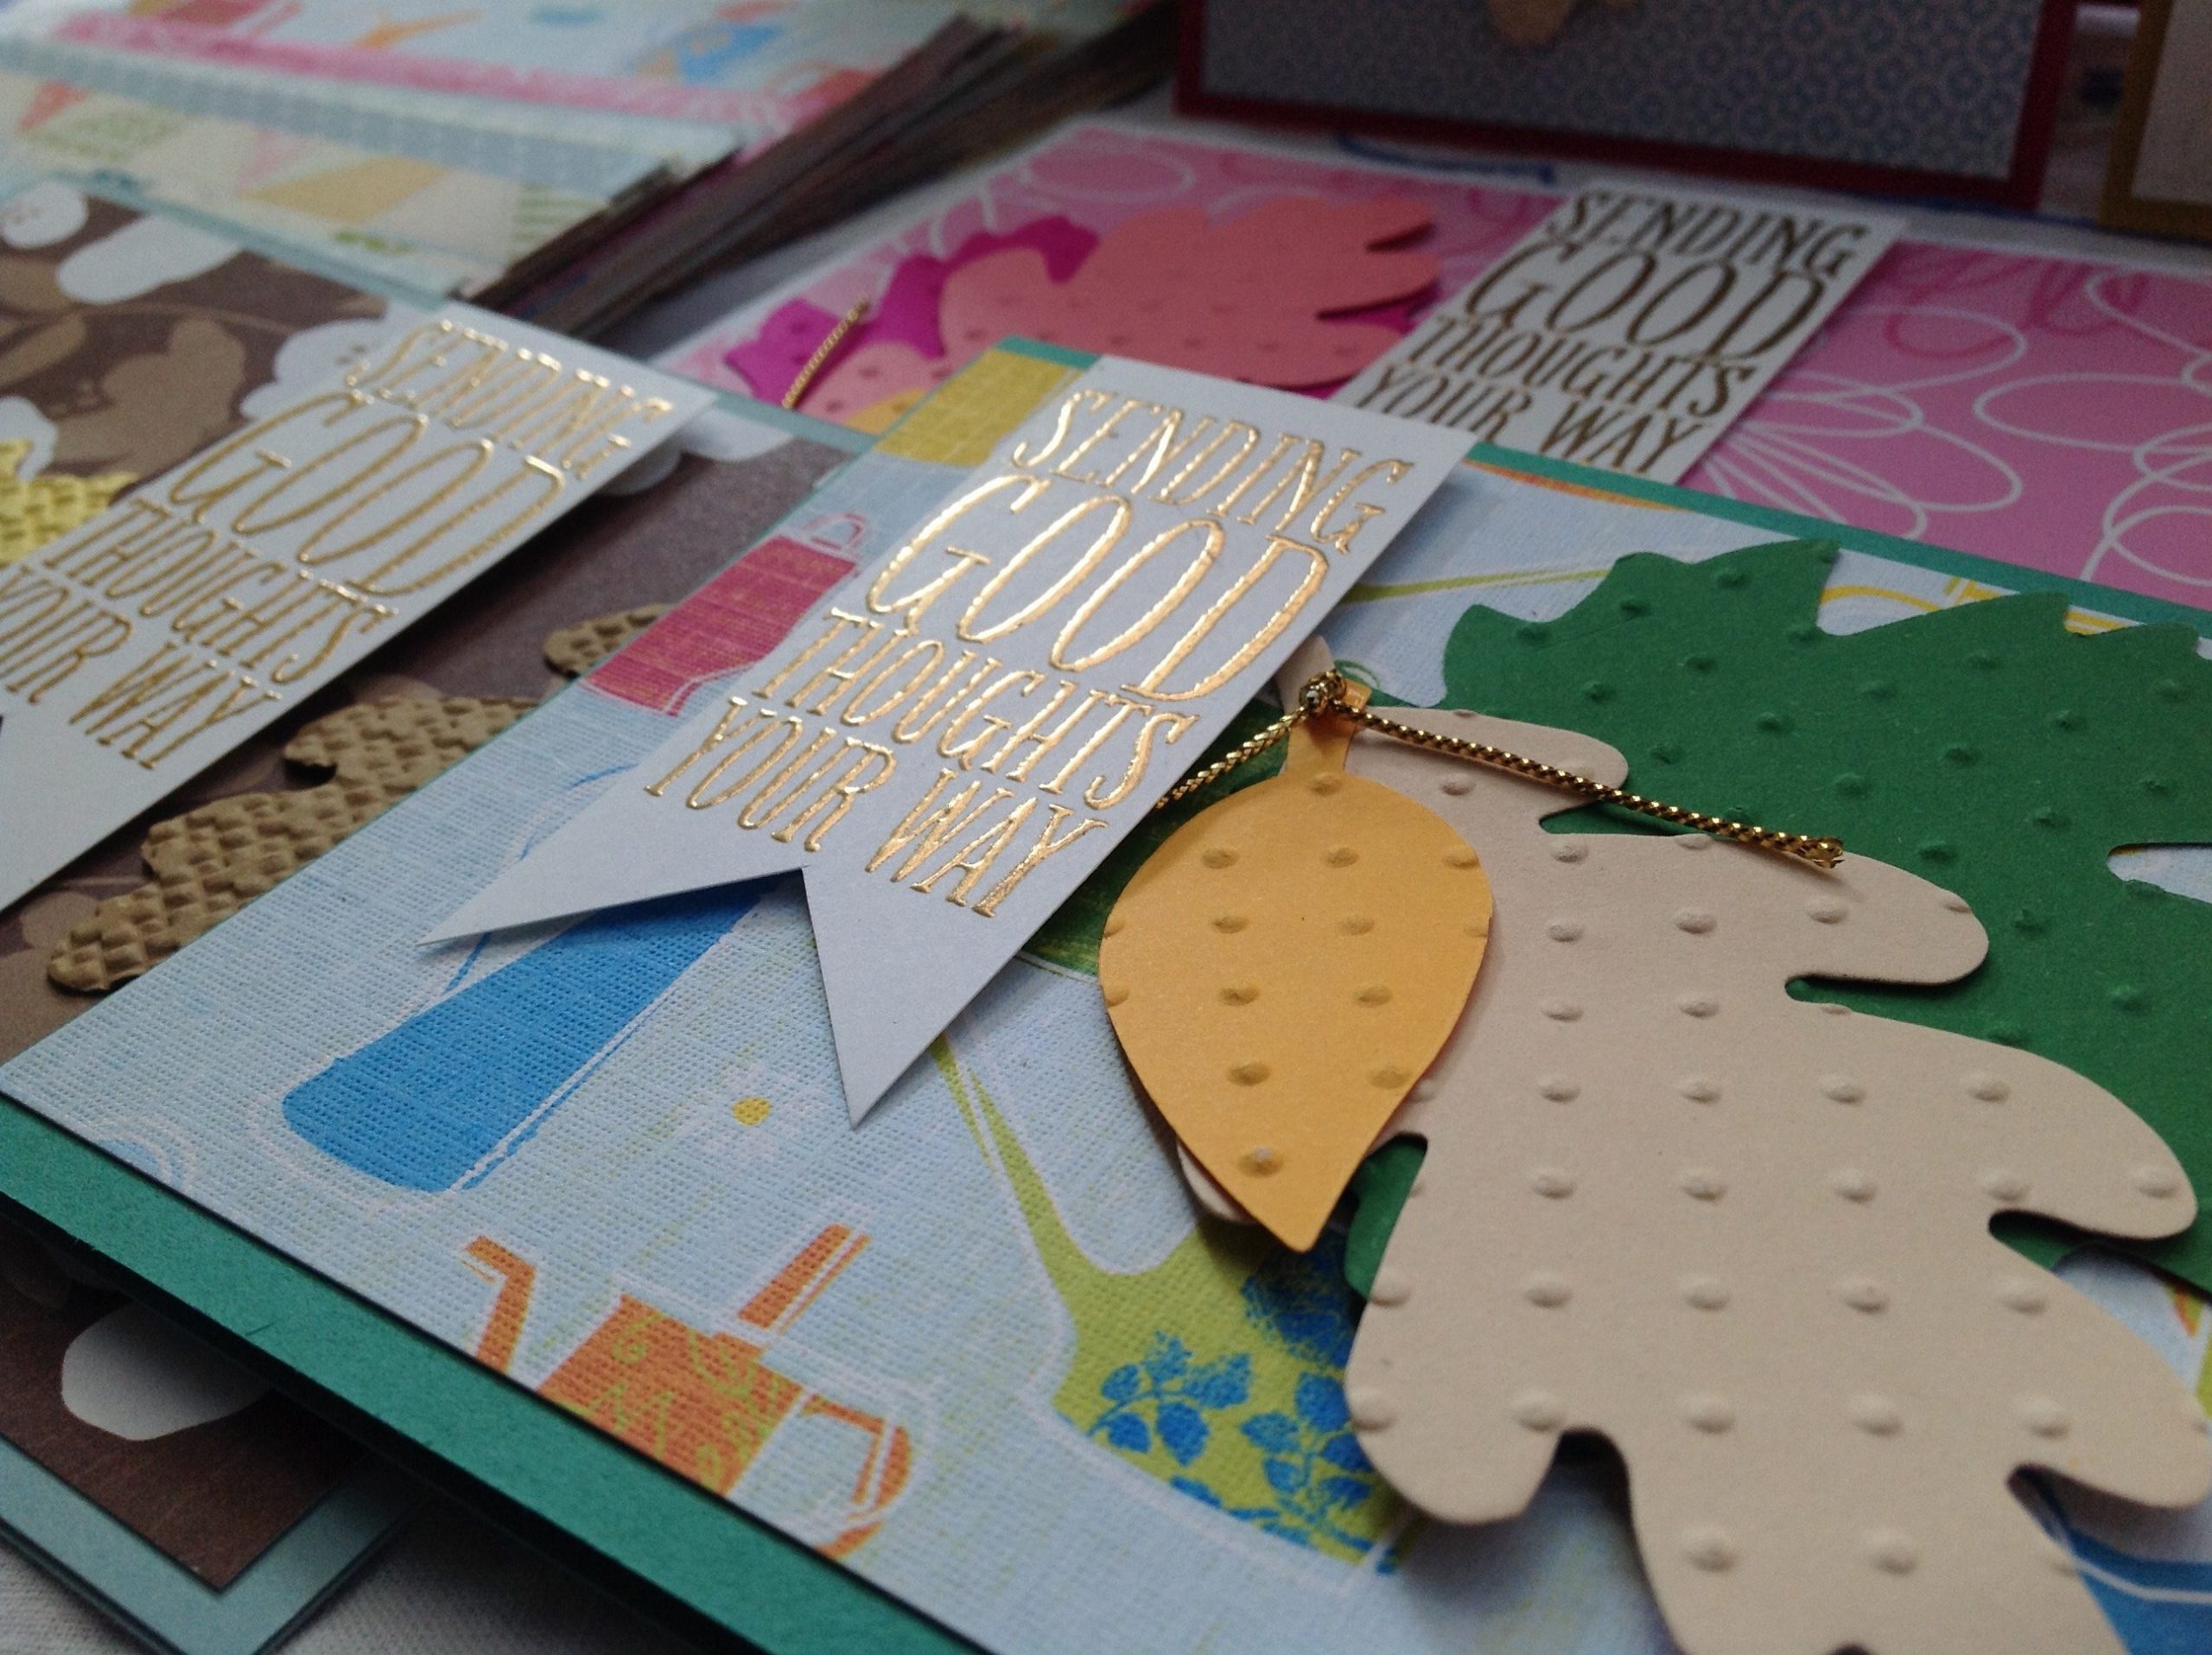 Heat embossed cards with greetings that say Sending good thoughts your way.